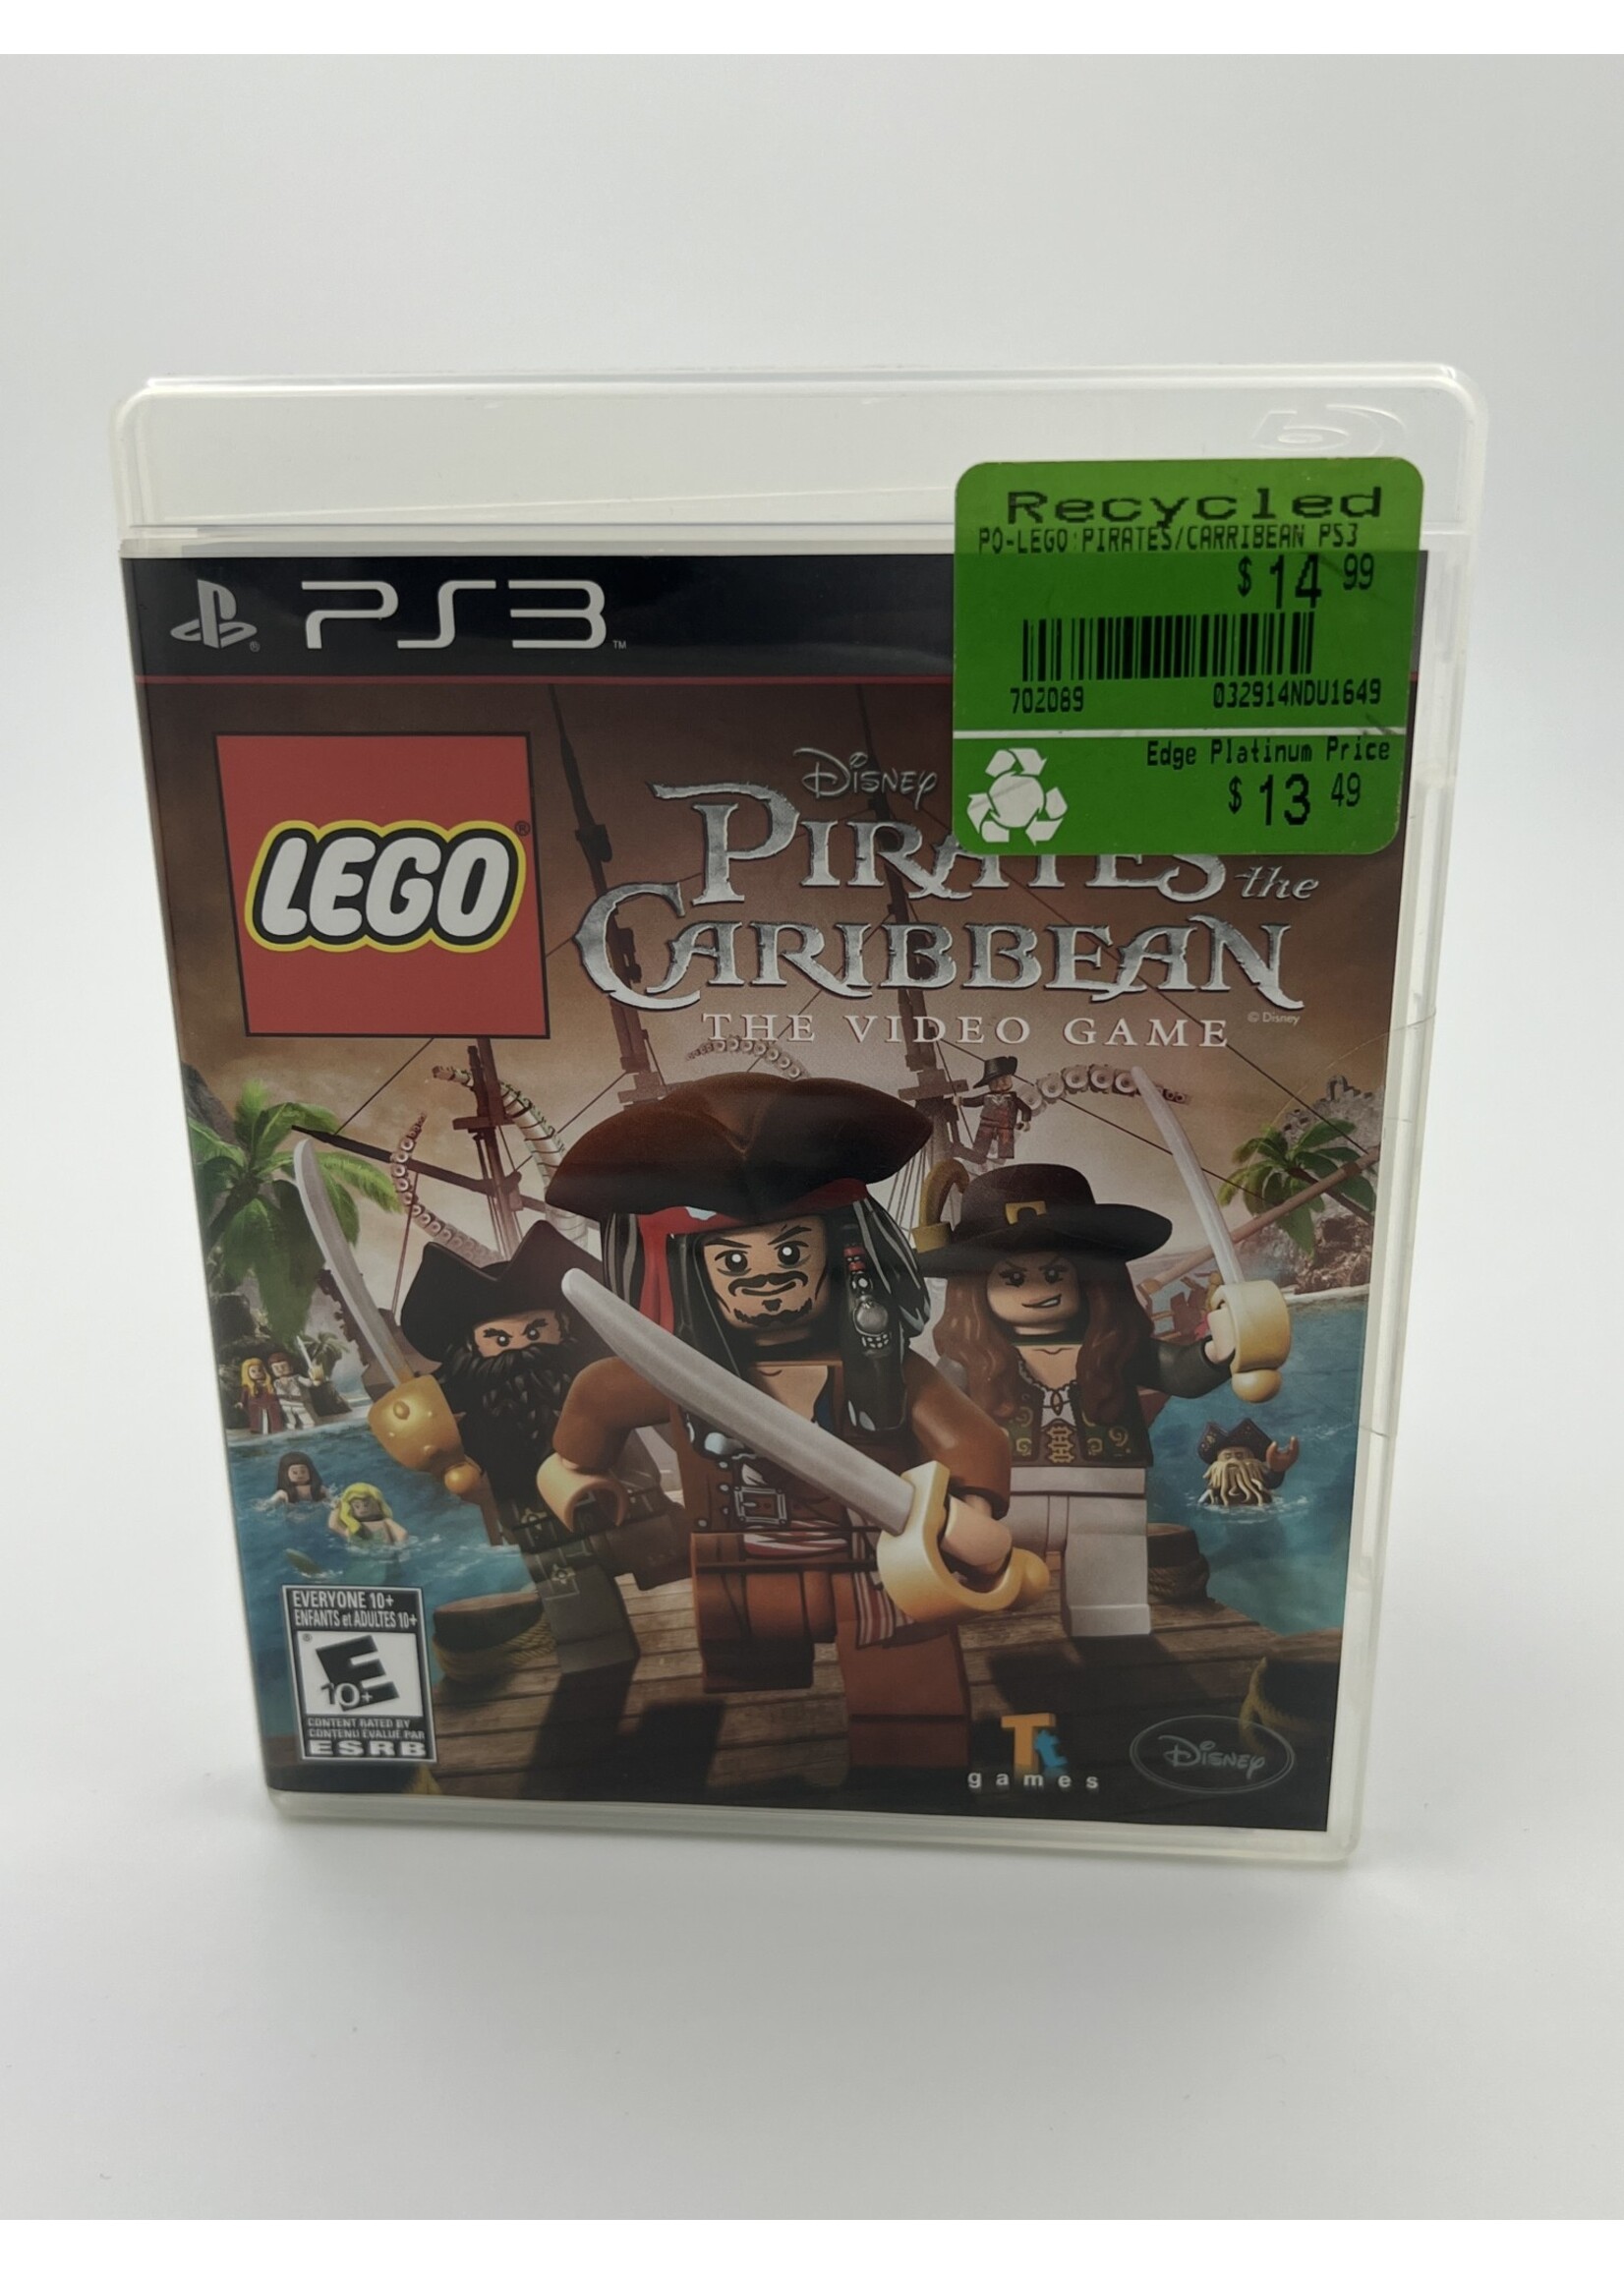 Sony Disney Lego Pirates Of The Caribbean The Video Game PS3